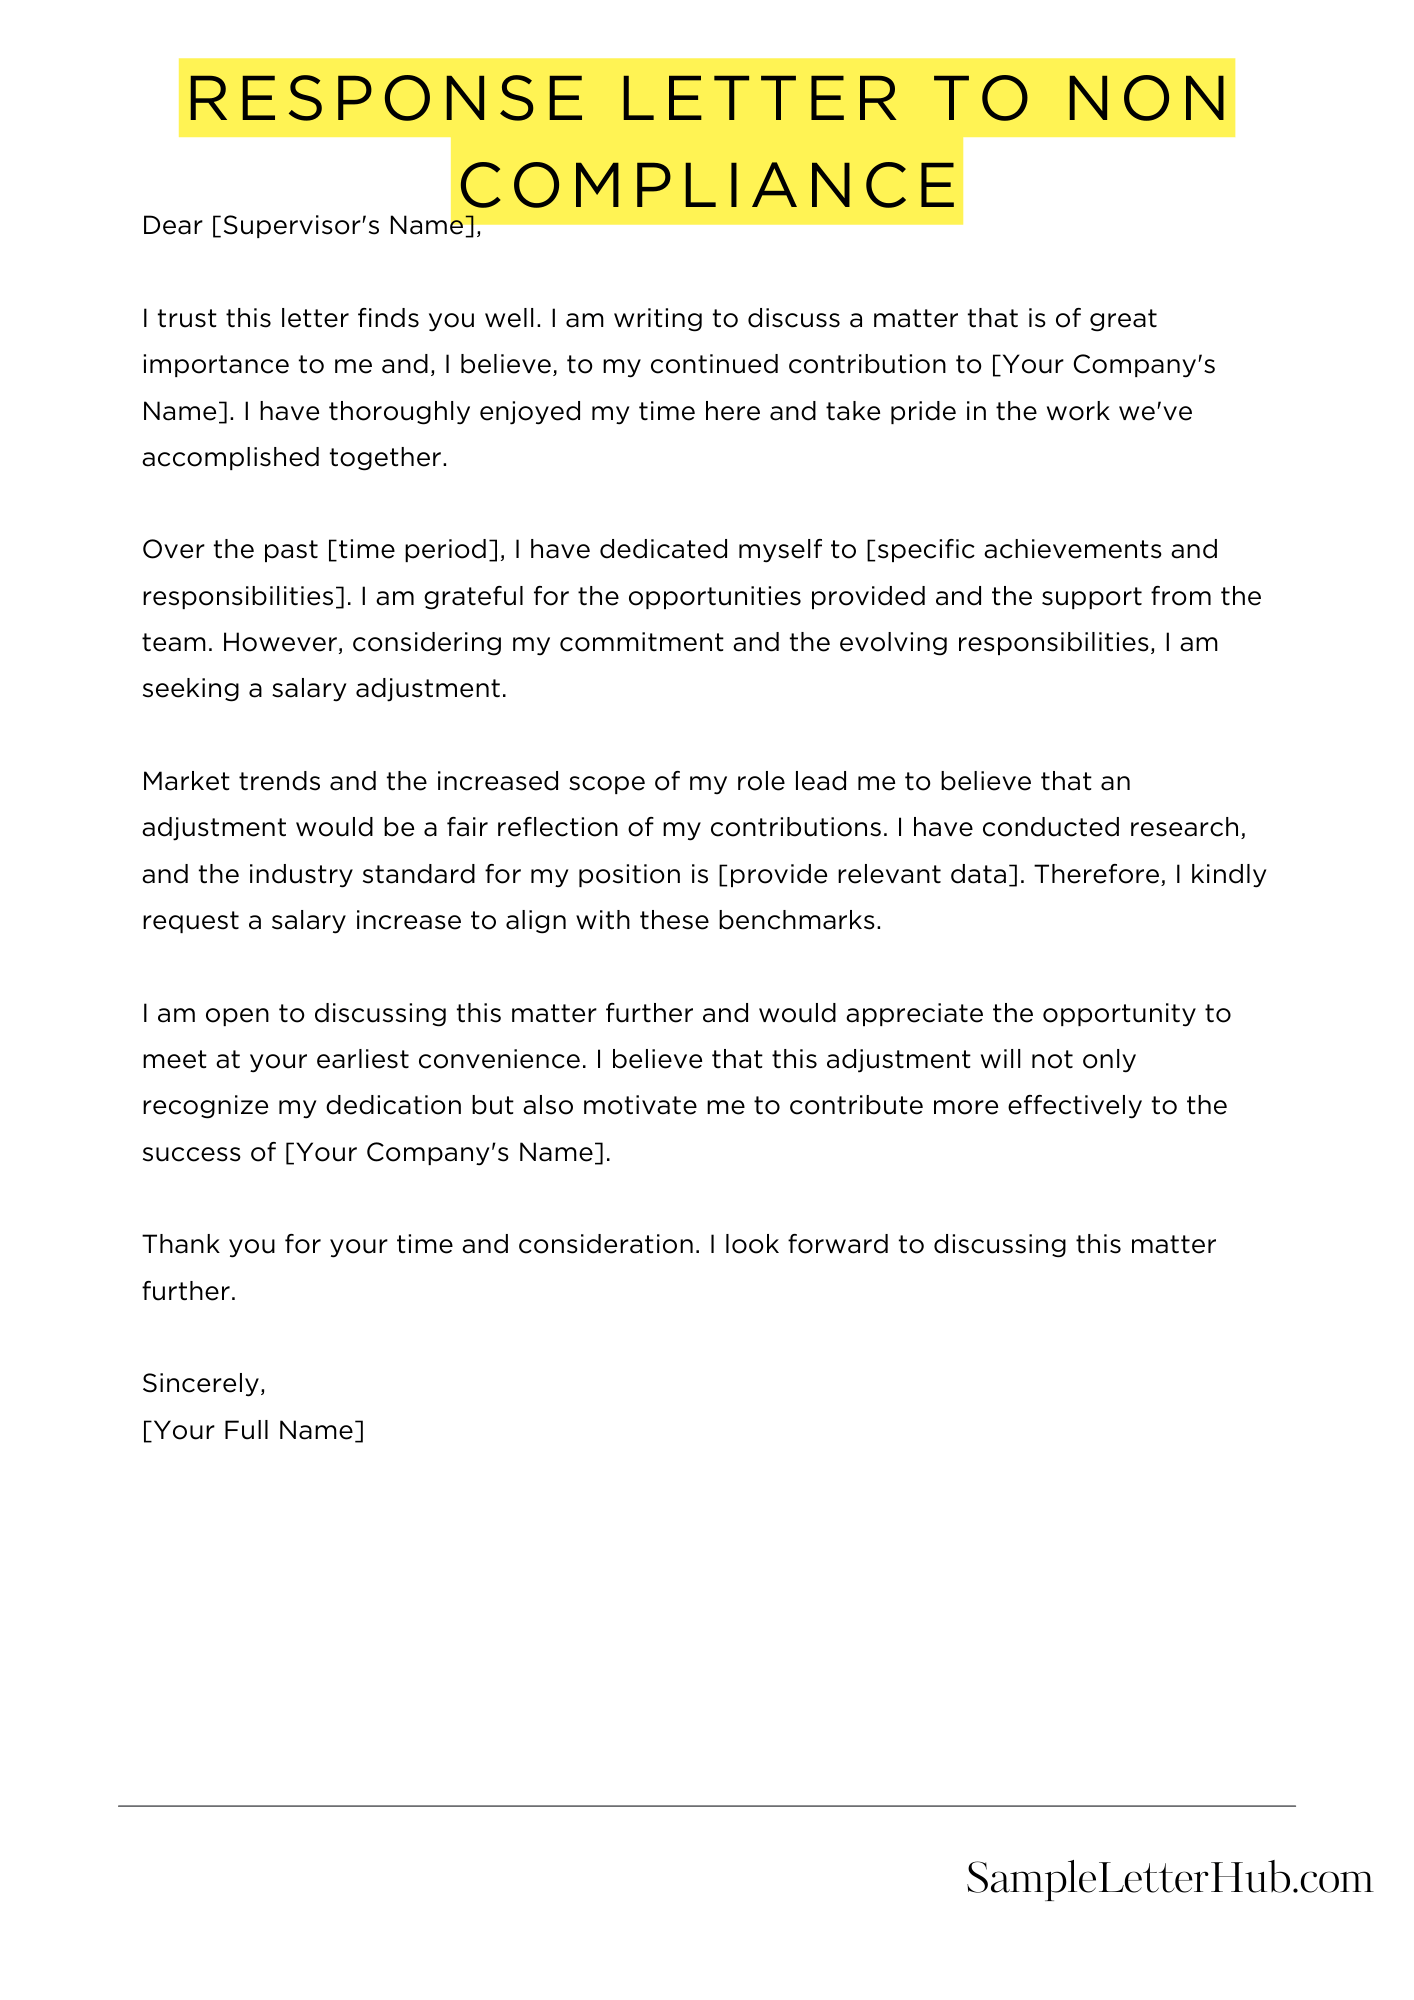 Response Letter To Non Compliance